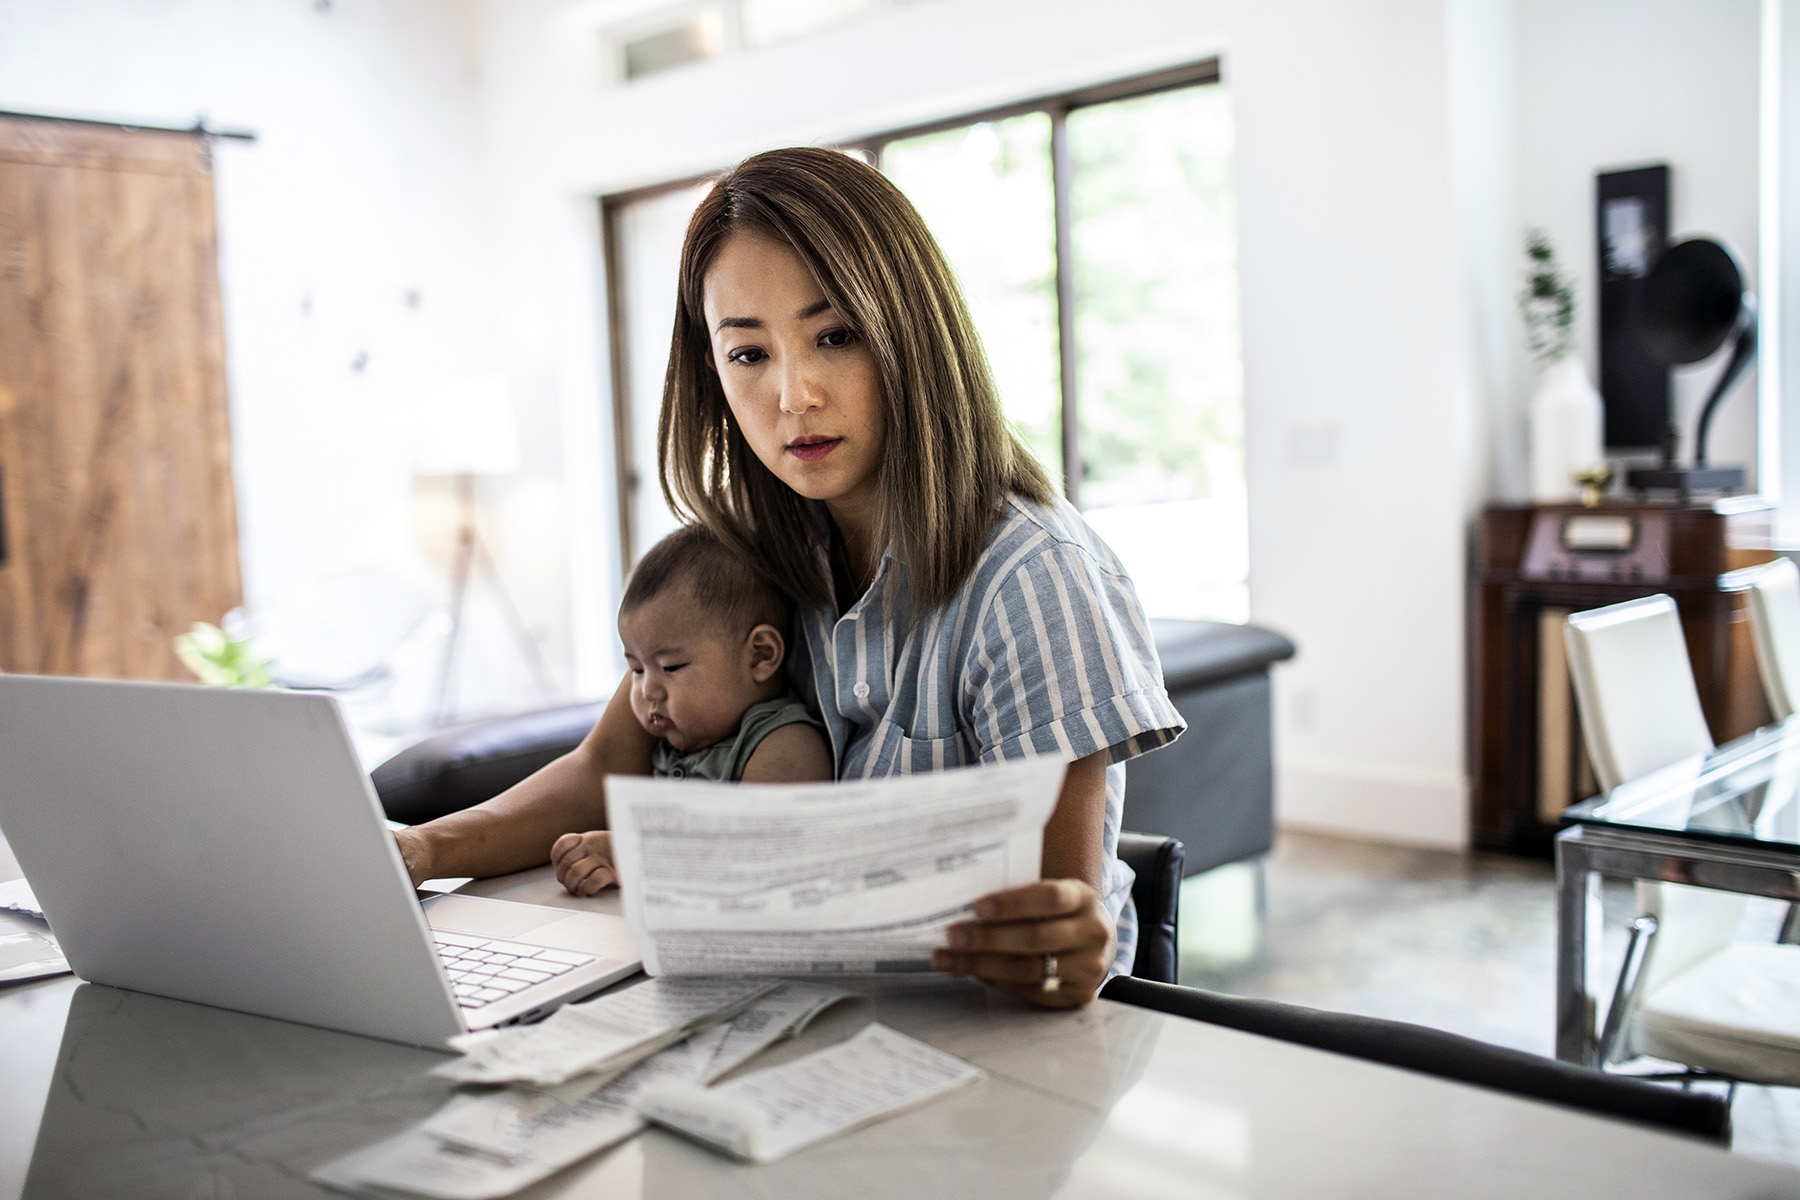 Mother working from home while holding baby on her lap. She's looking at a document she's holding in her hand.